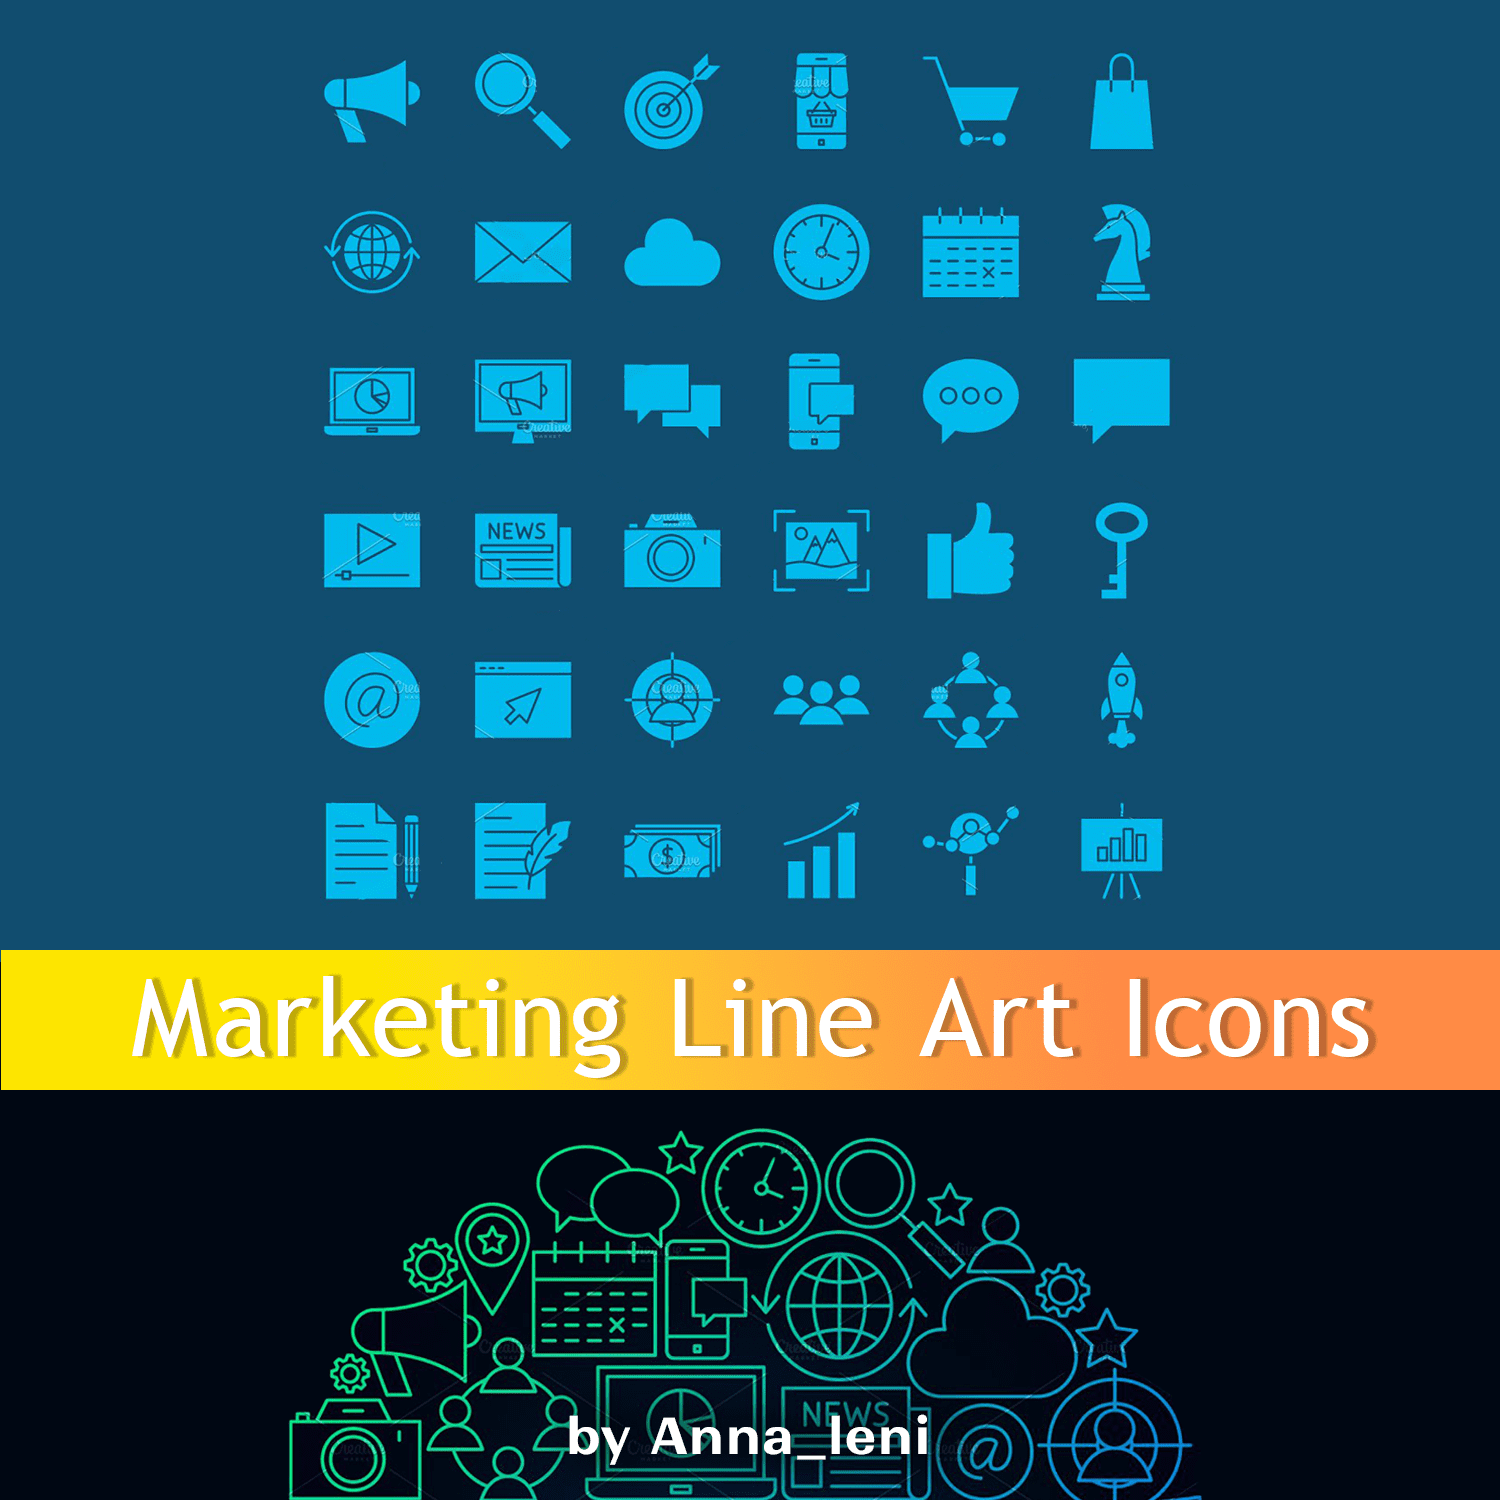 Marketing Line Art Icons cover.